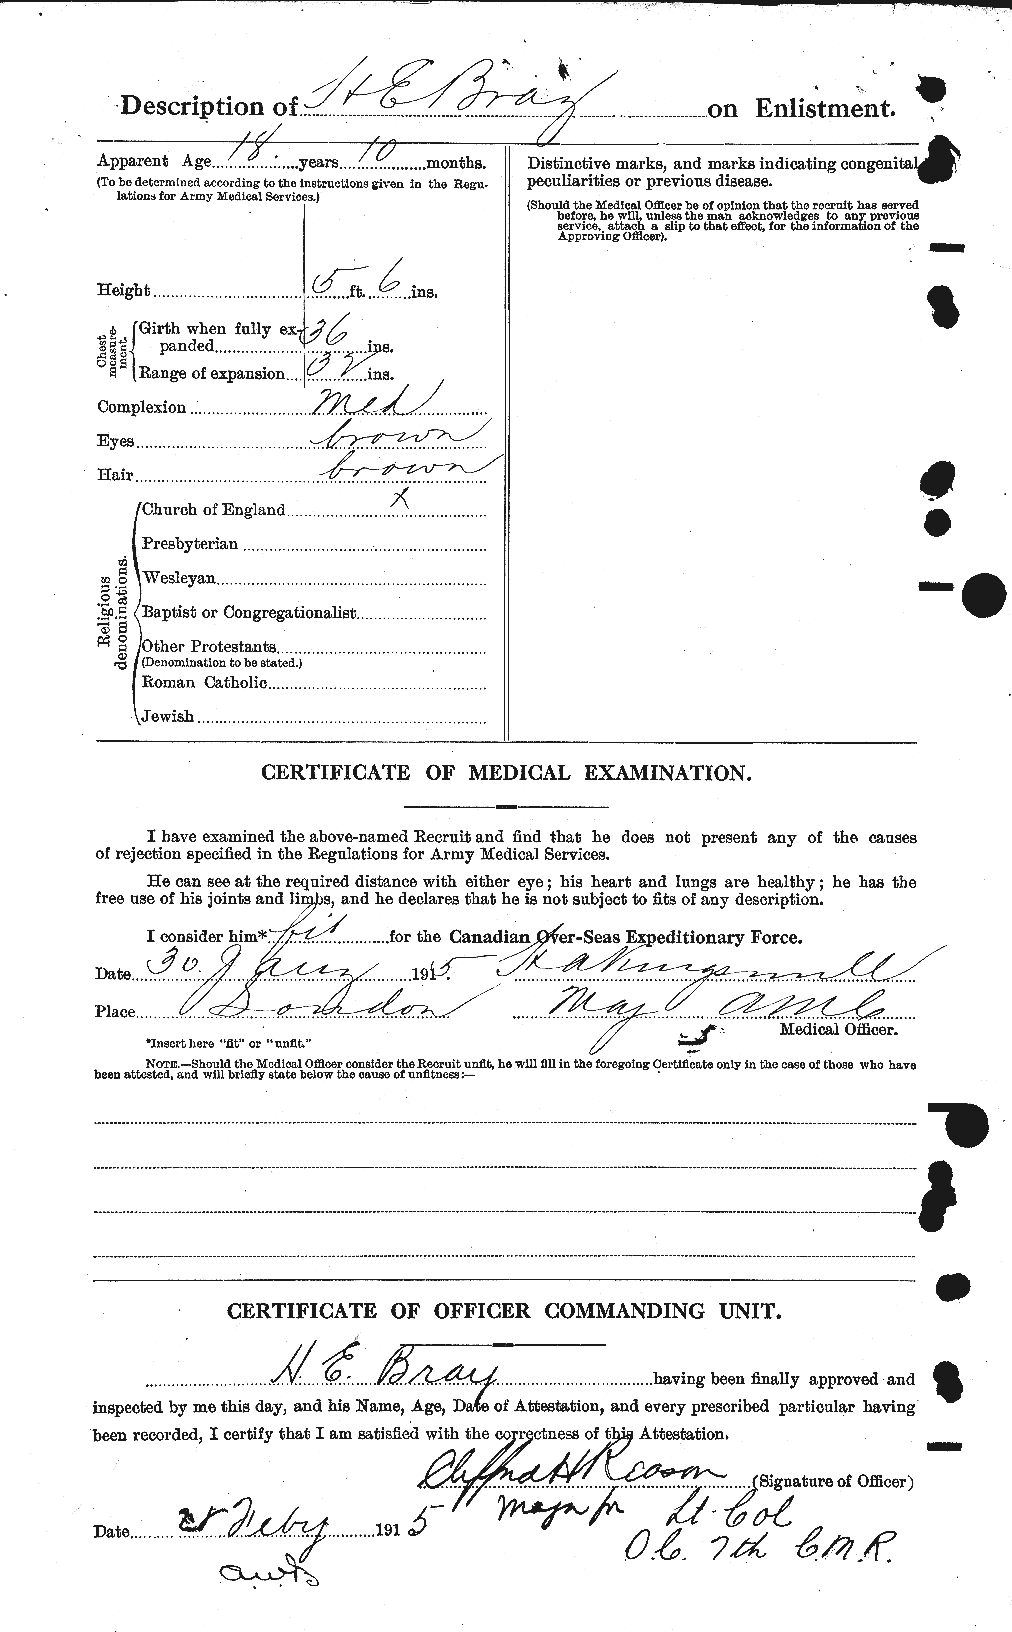 Personnel Records of the First World War - CEF 260737b